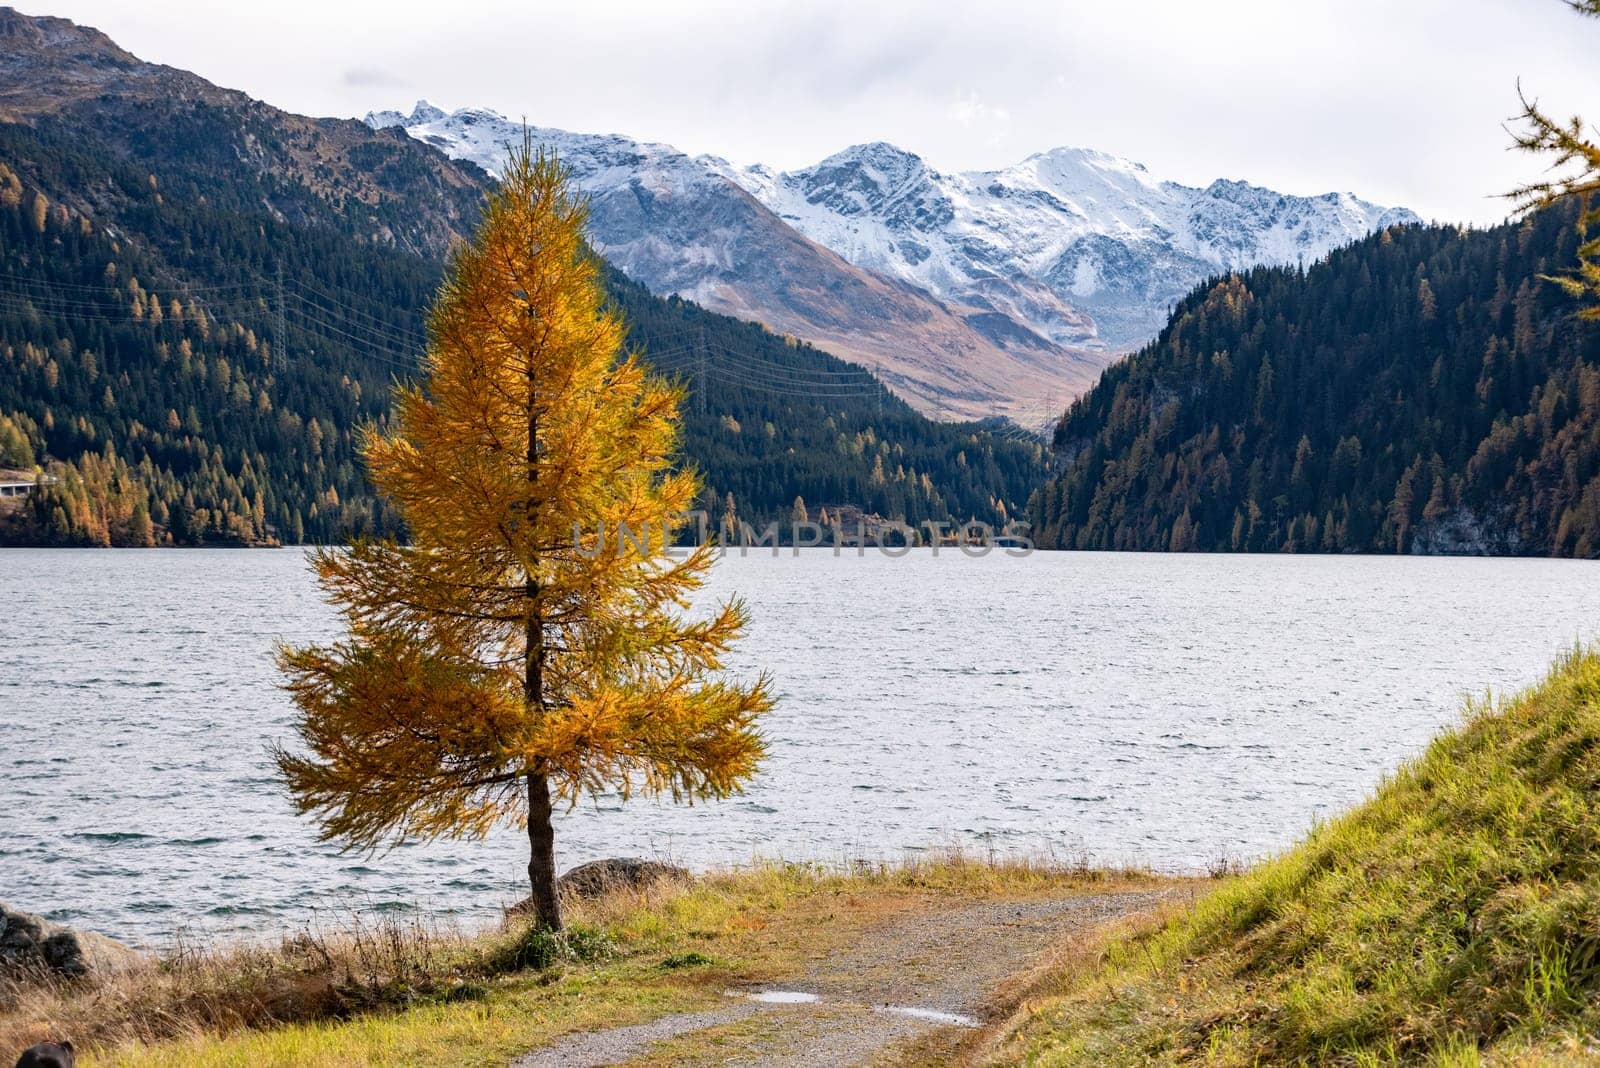 A lonely larch at lake Marmorera in the alps, Switzerland by imagoDens